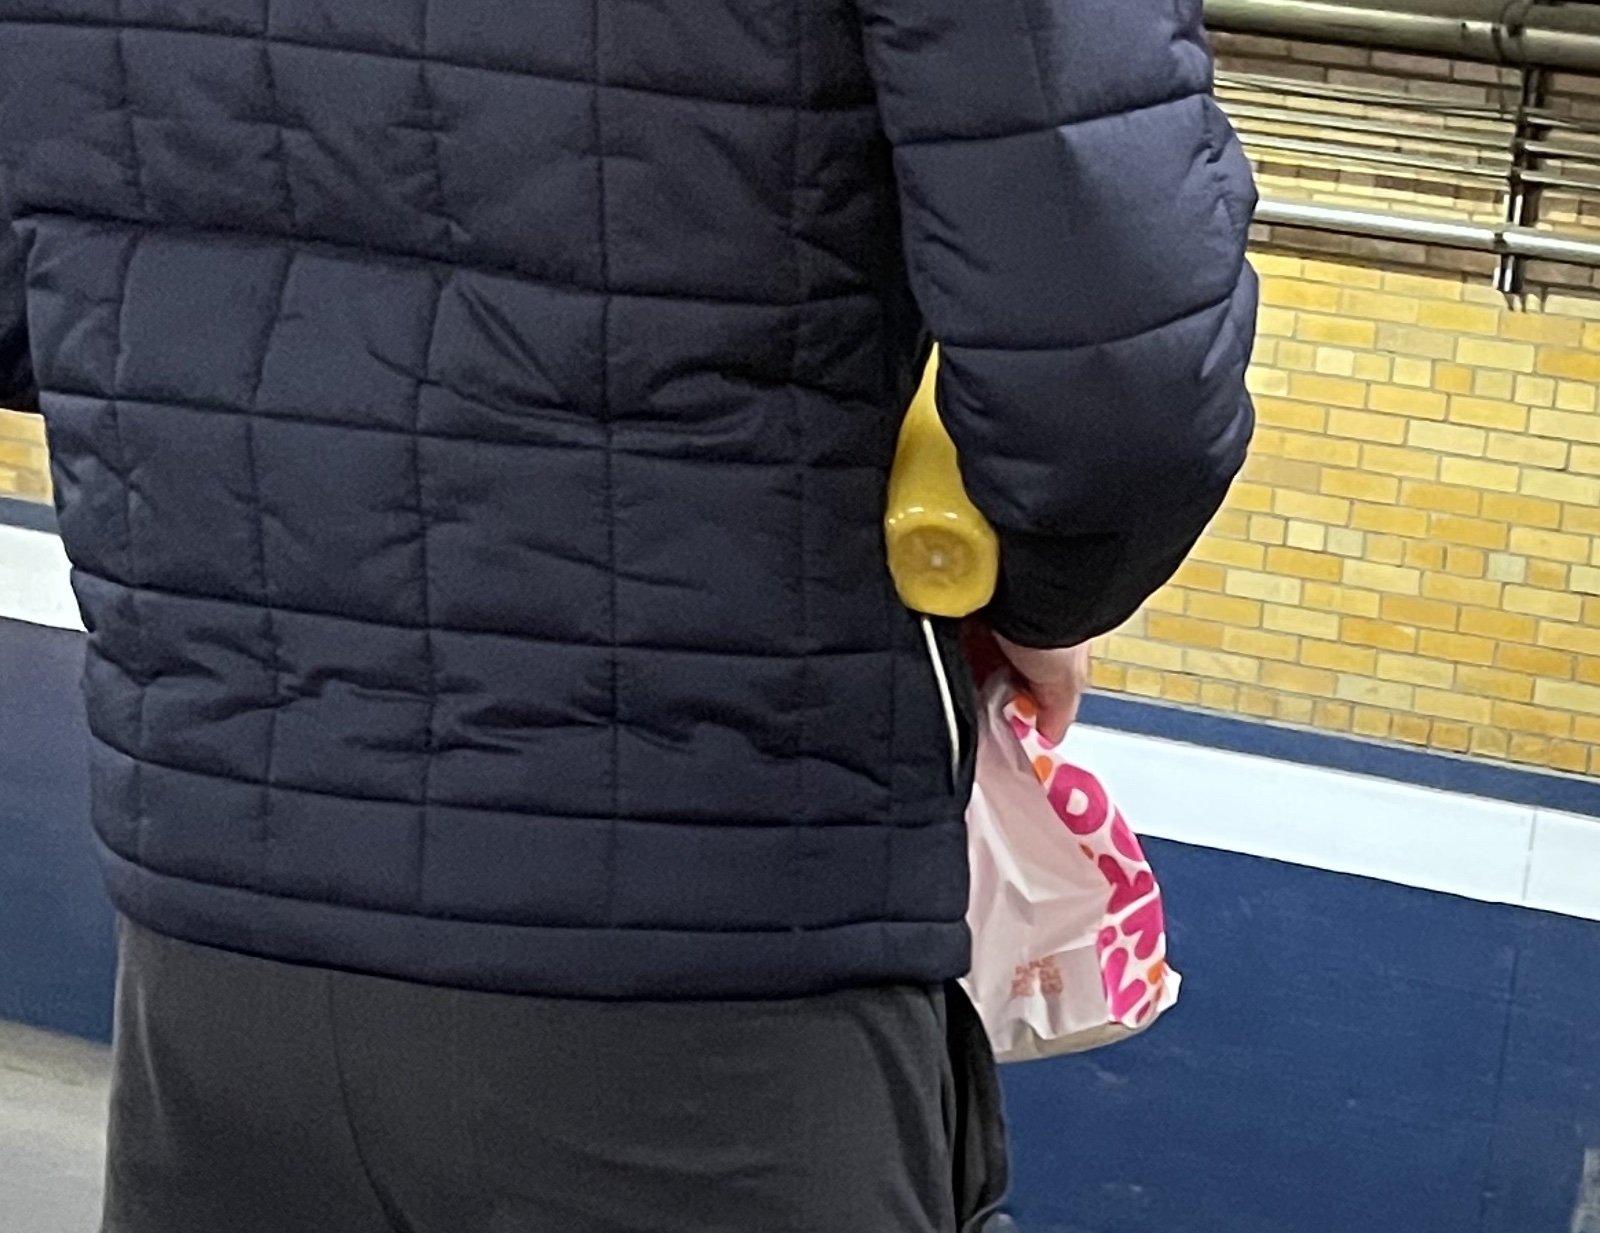 This hero brought his own mustard